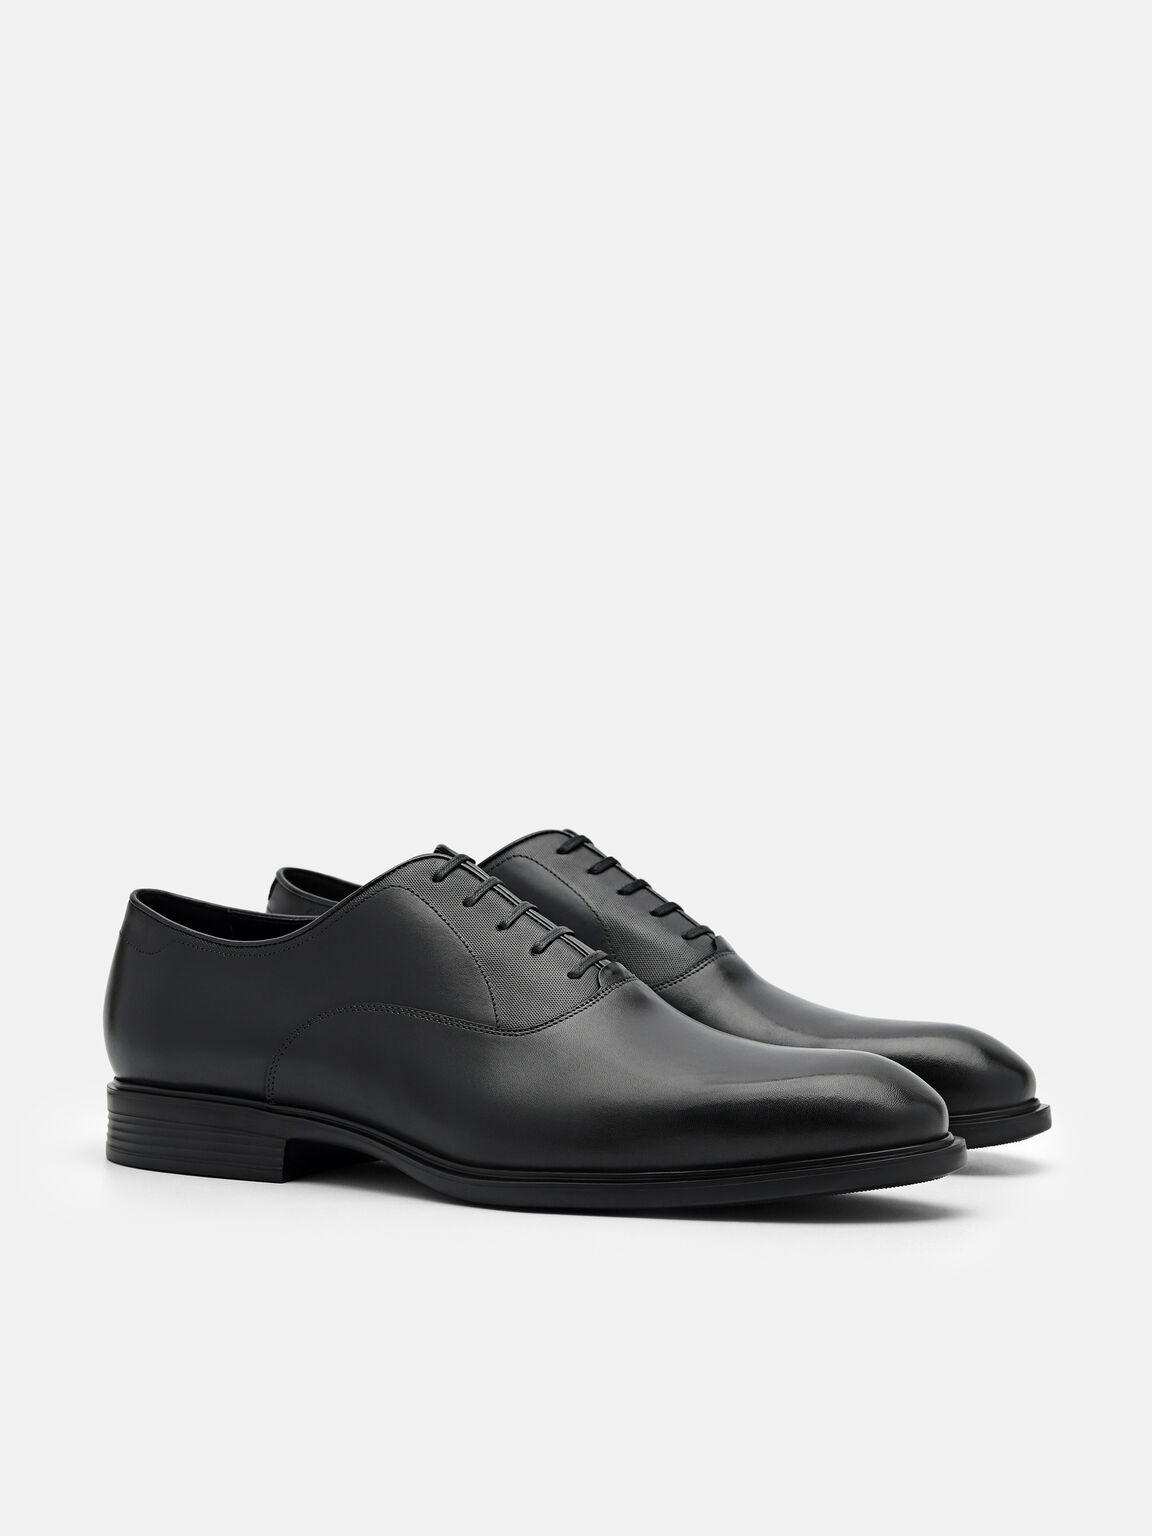 Black Leather Oxford Shoes - PEDRO MY